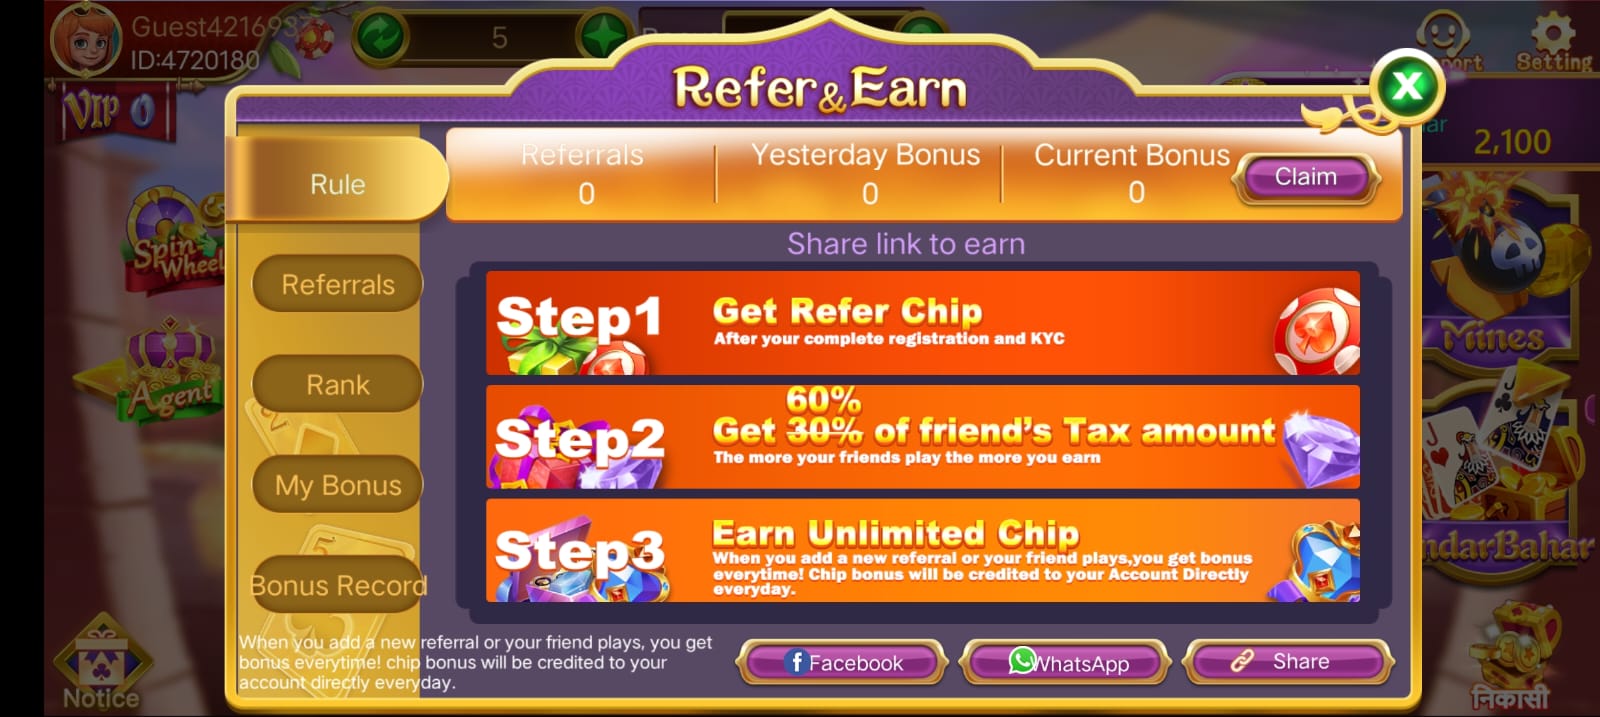 Refer And Earn In Rummy Go Application